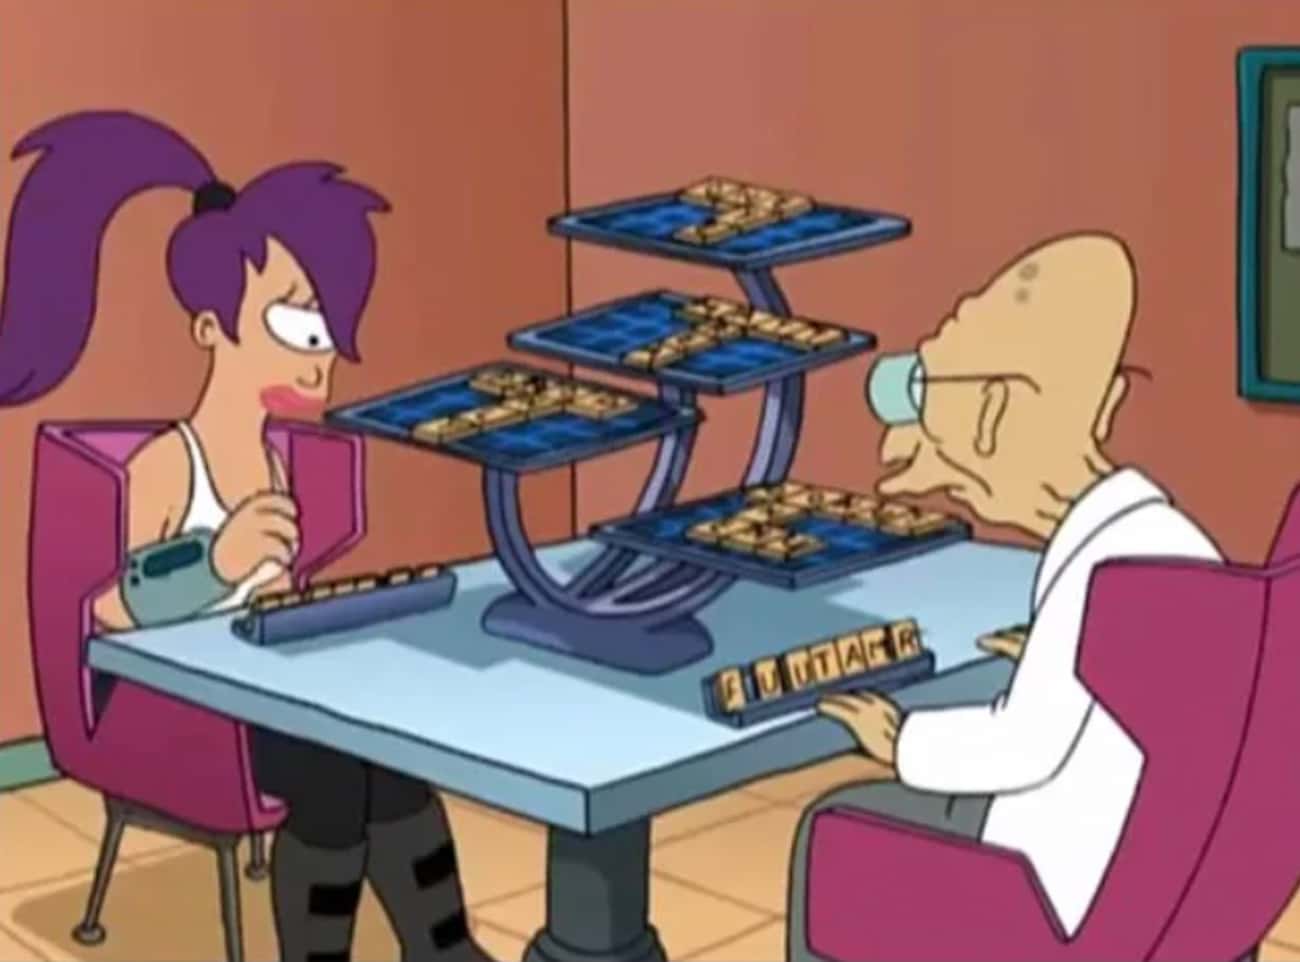 One Letter Away From 'Futurama'